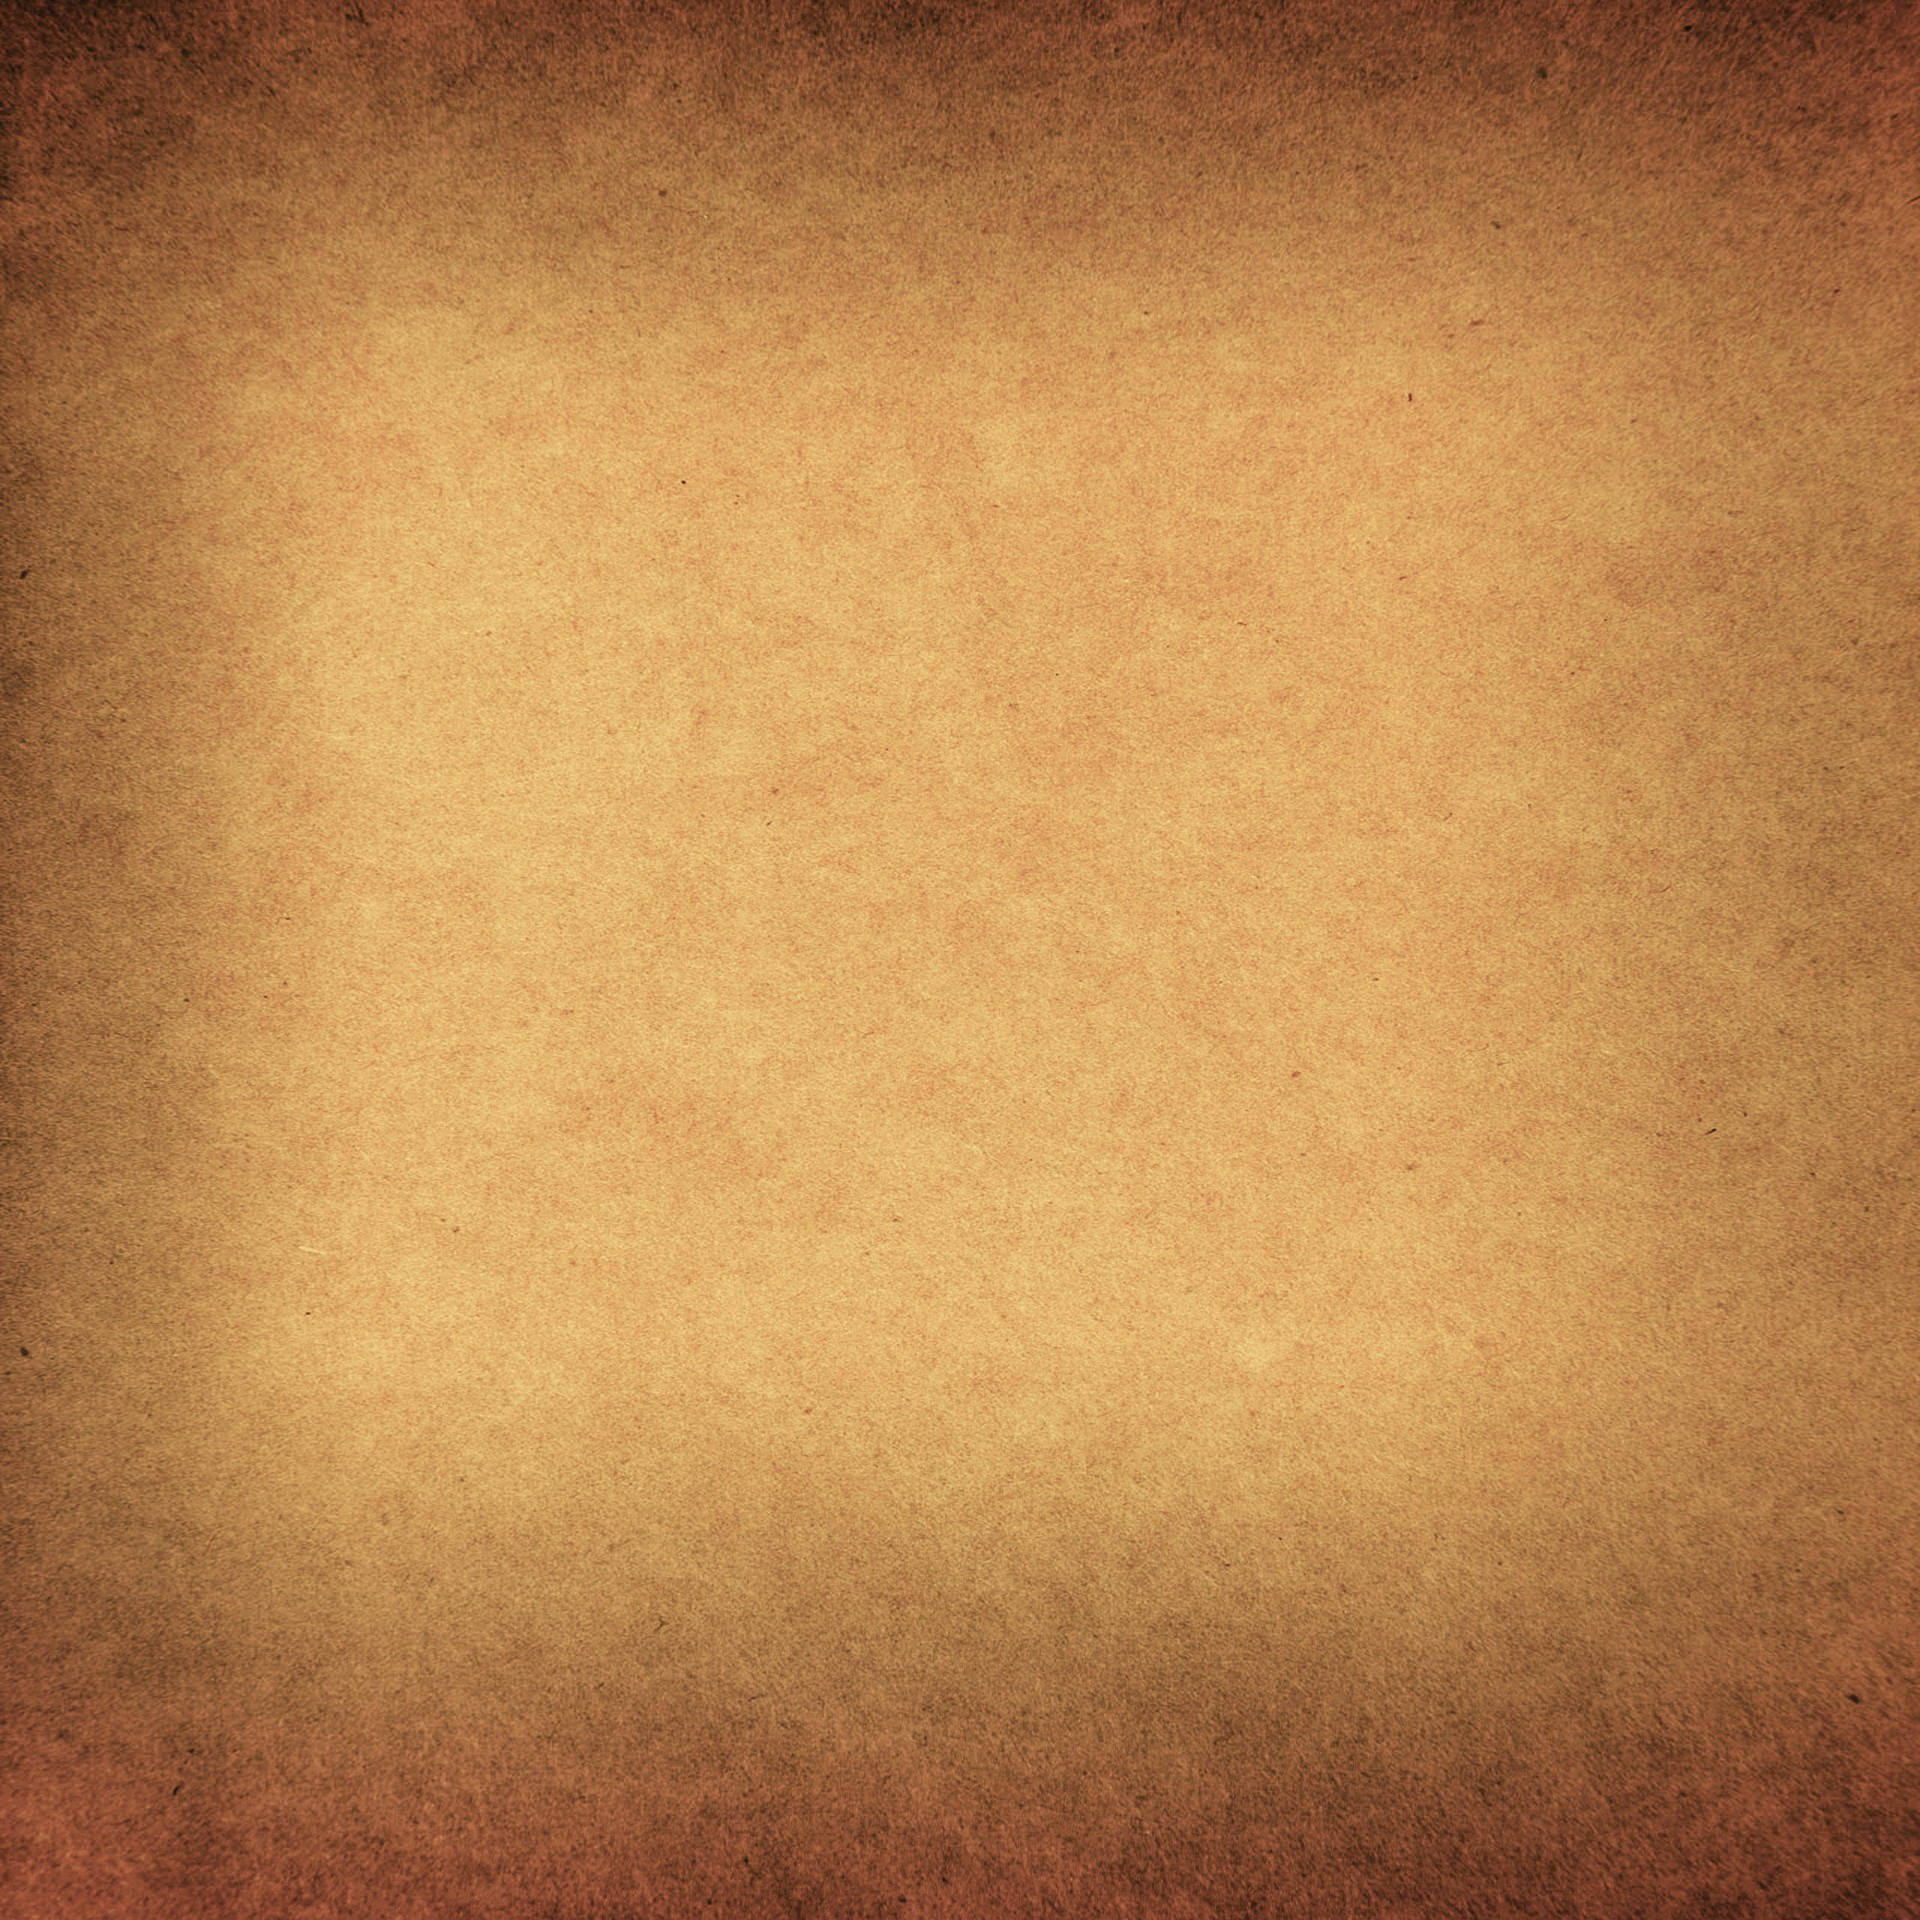 Undecorated Brown Old Paper Background